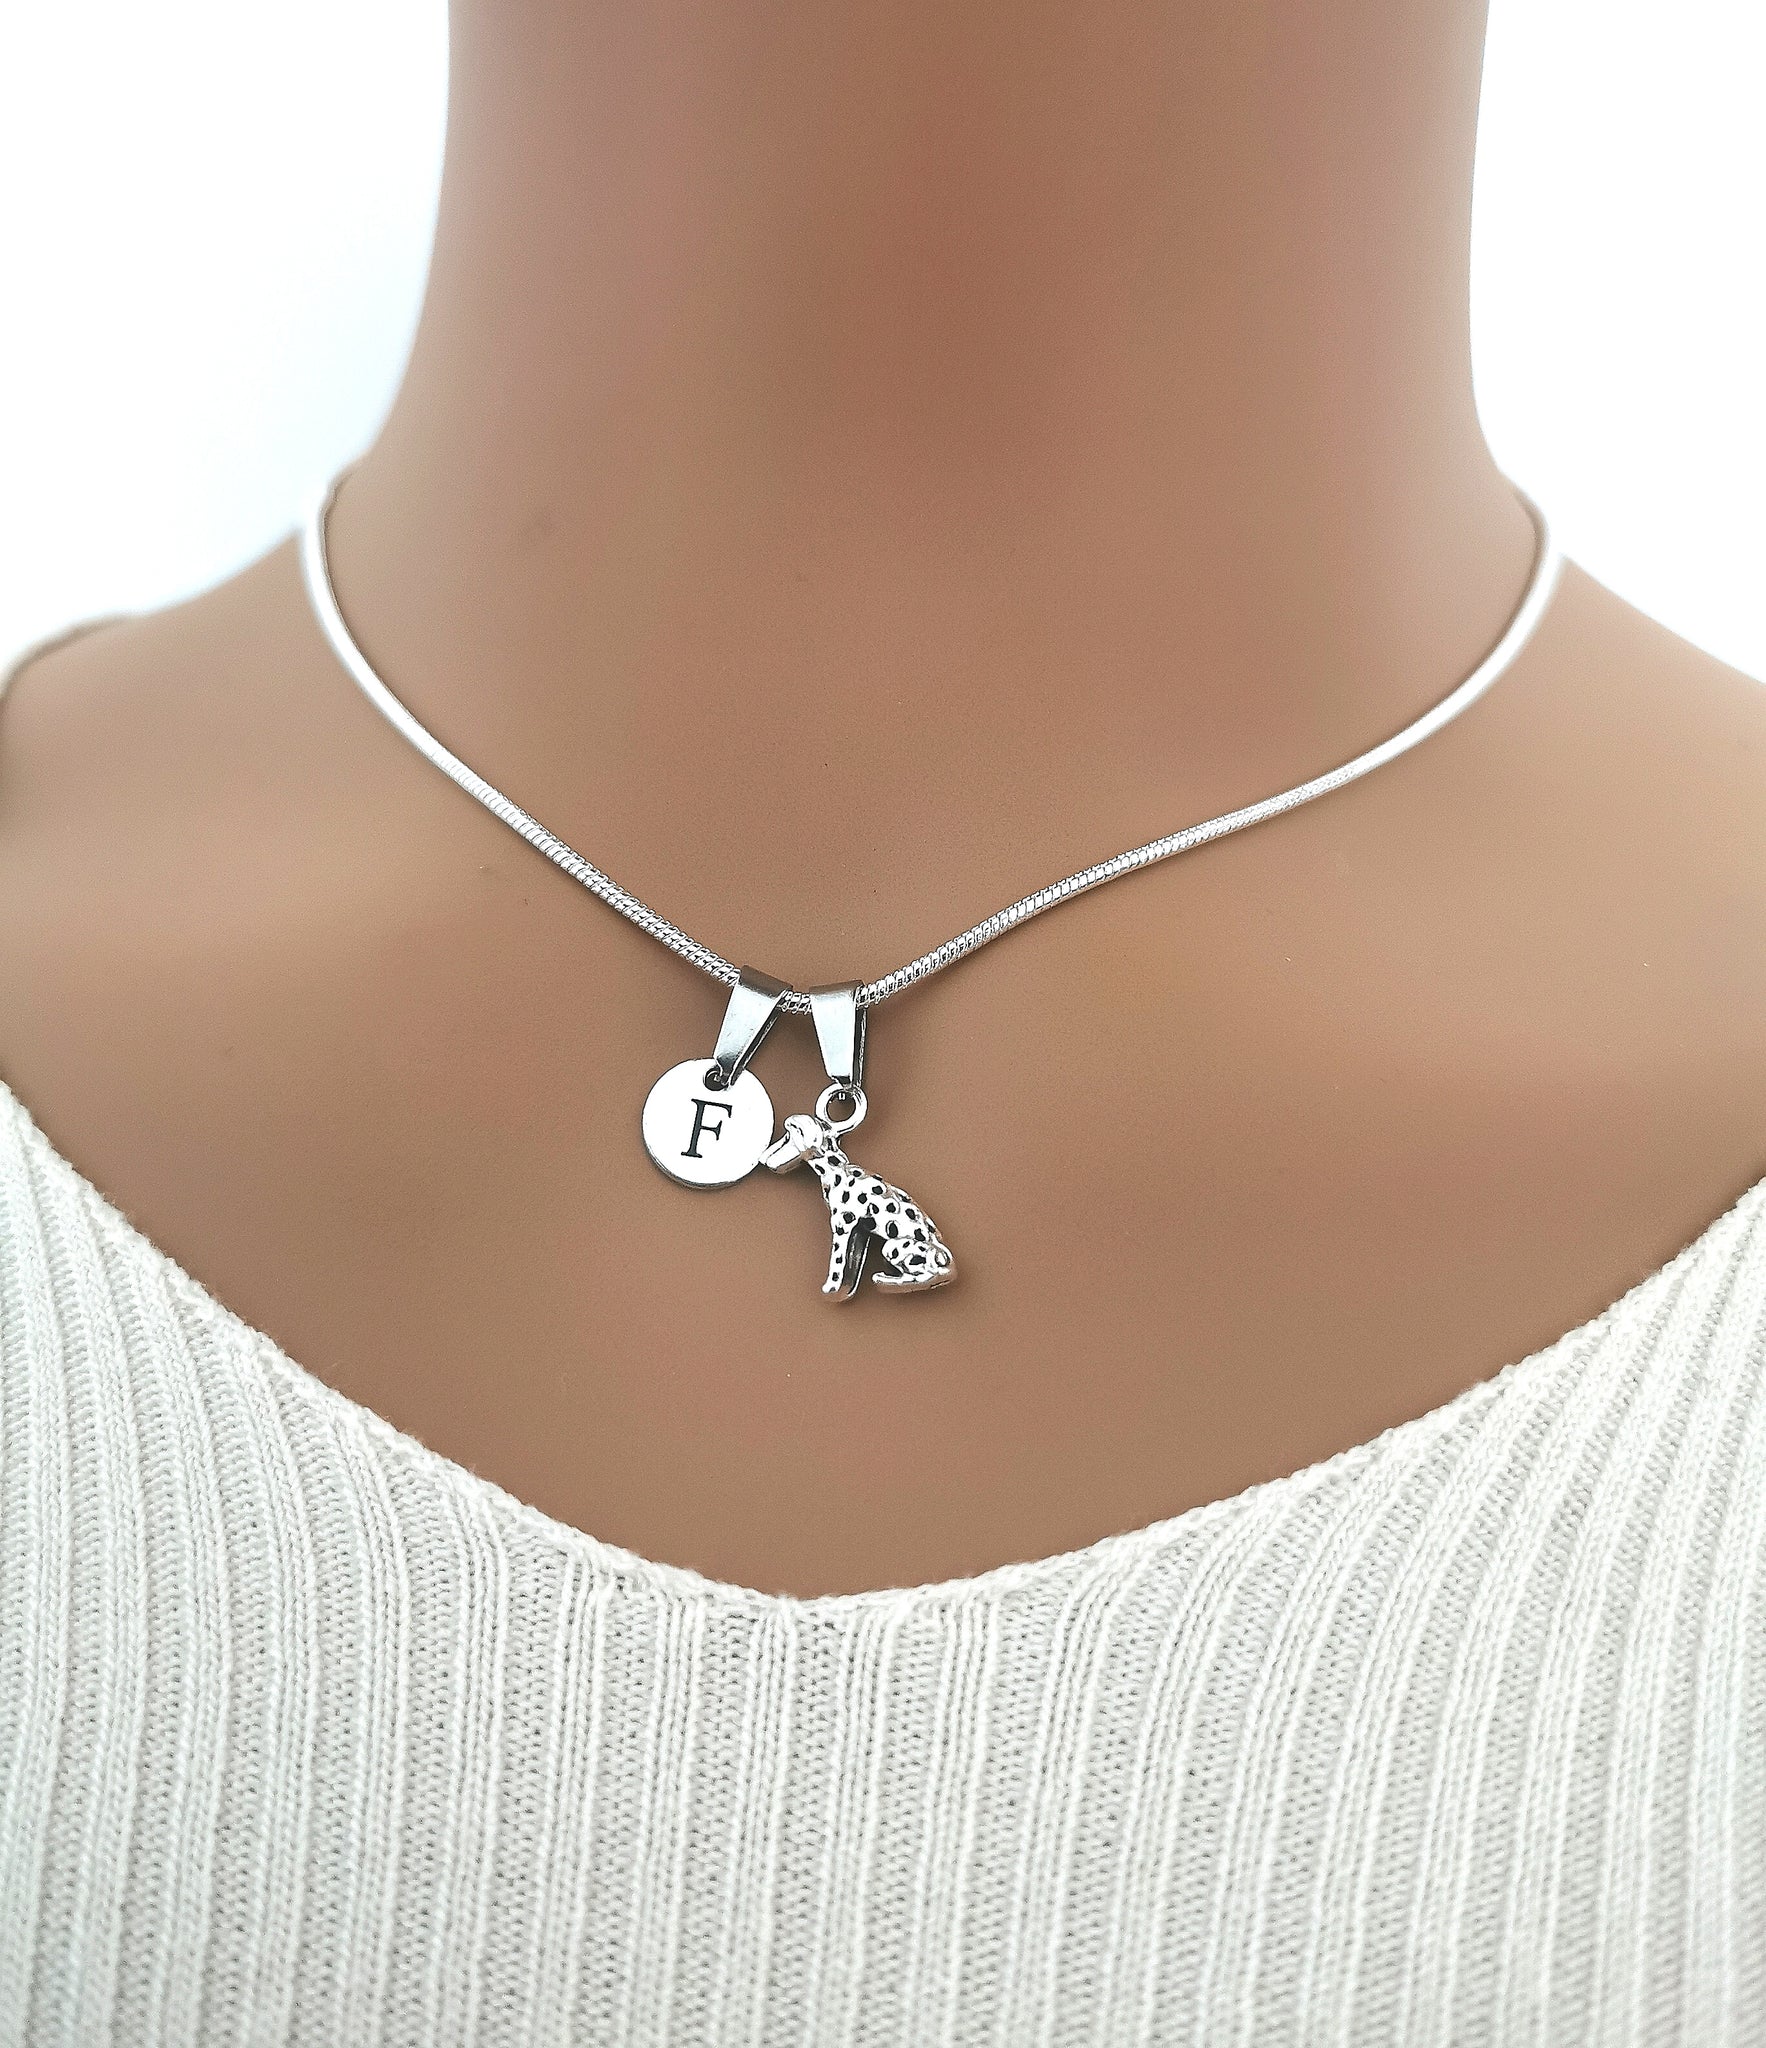 Dalmatian Necklace - A Stylish and Elegant Tribute to Your Four-Legged Friend